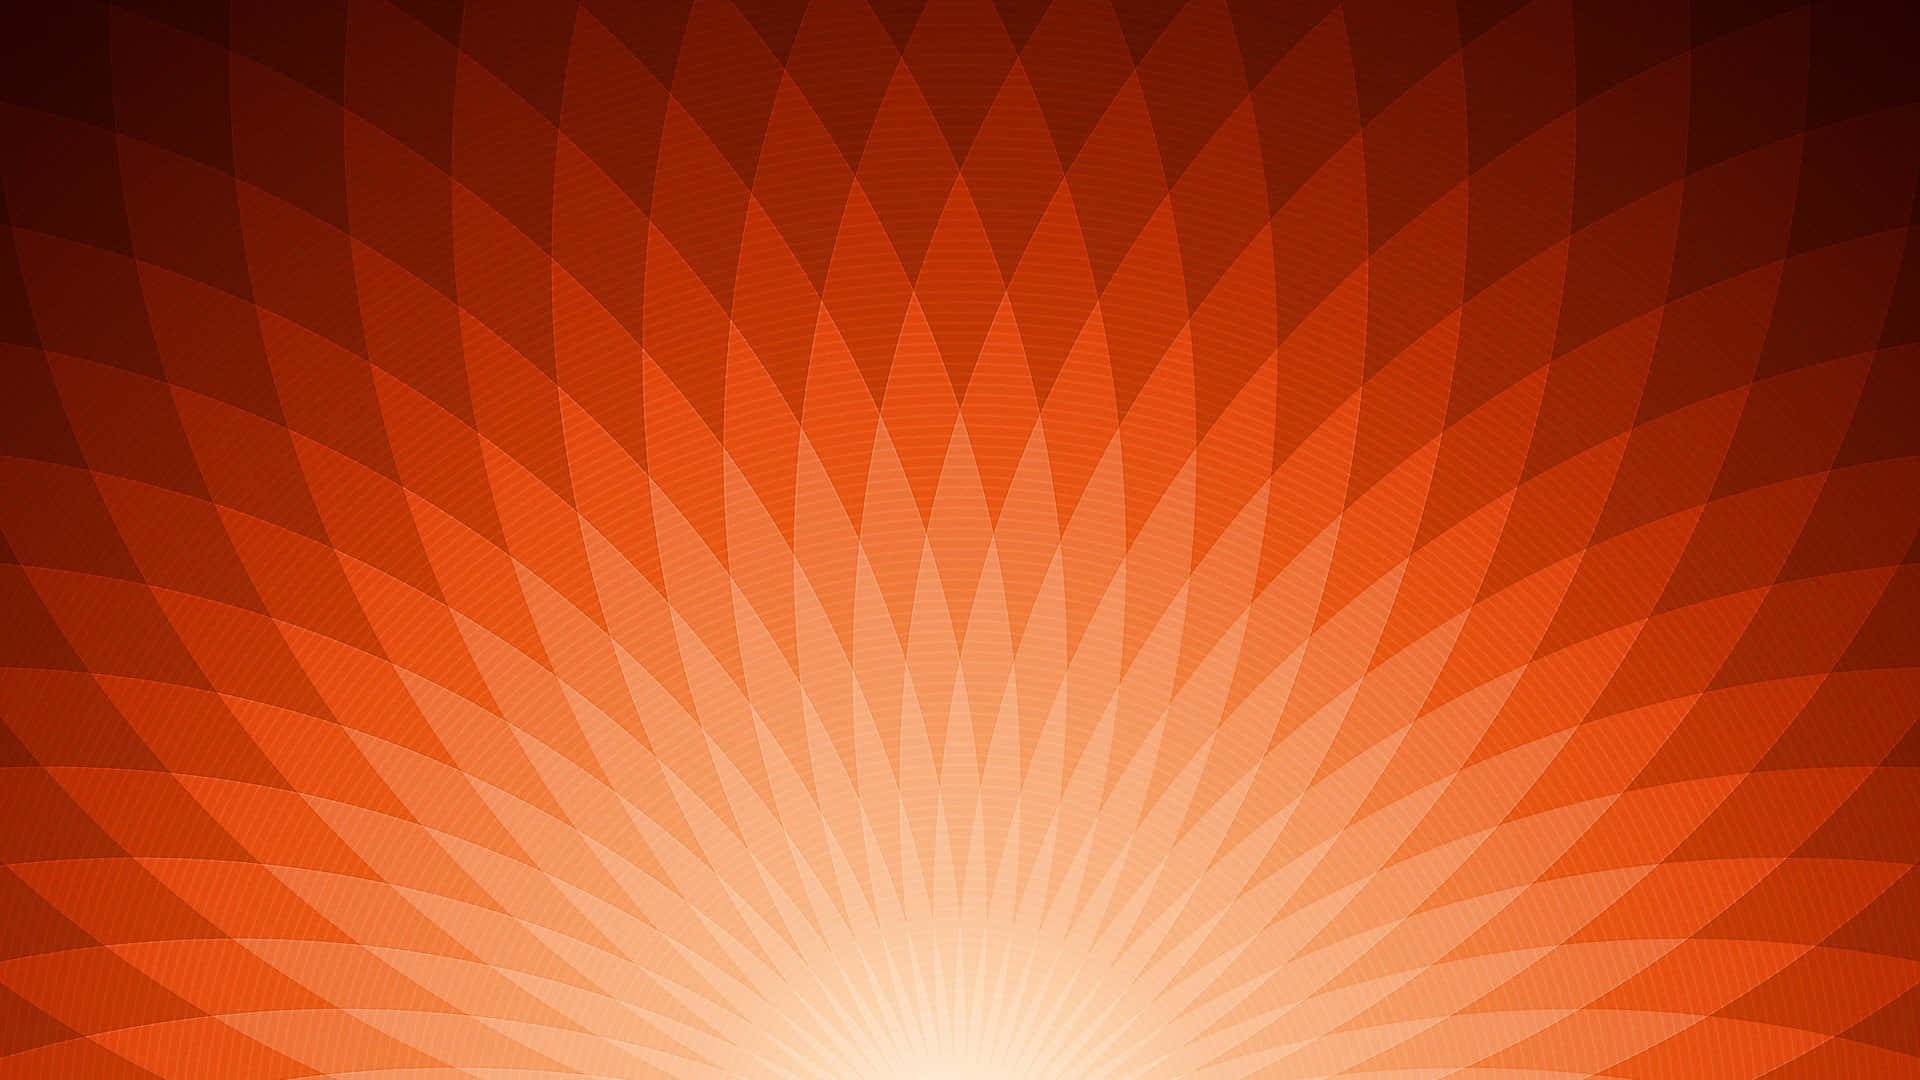 An Orange Abstract Background With A Sunburst